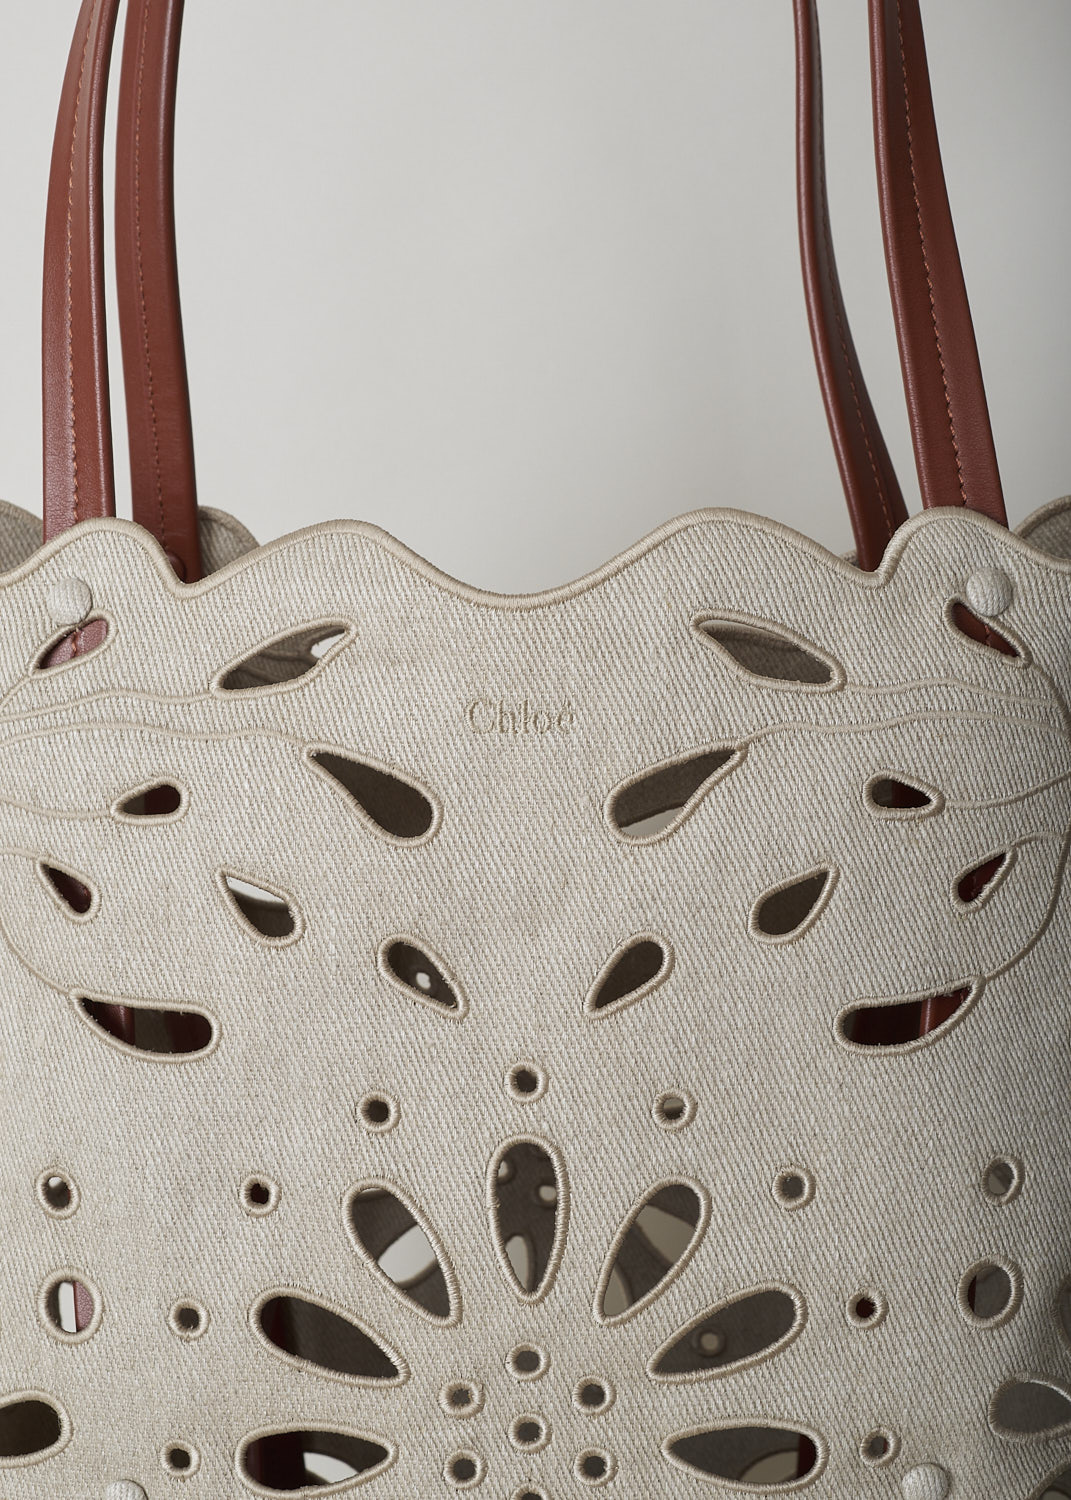 CHLOÃ‰ LARGE KAMILLA NORTH - SOUTH TOTE BAG IN SEPIA BROWN
,CHC22SS492G2327S_KAMILLA_LARGE_NORTH_SO, Beige, Detail, This large Kamilla North - South tote bag in sepia brown has two tan leather top handles. The linen has a scalloped top edge and floral broderie anglaise detailing throughout. On the inside, the bag has a removable tan leather pouch with a zipper.  